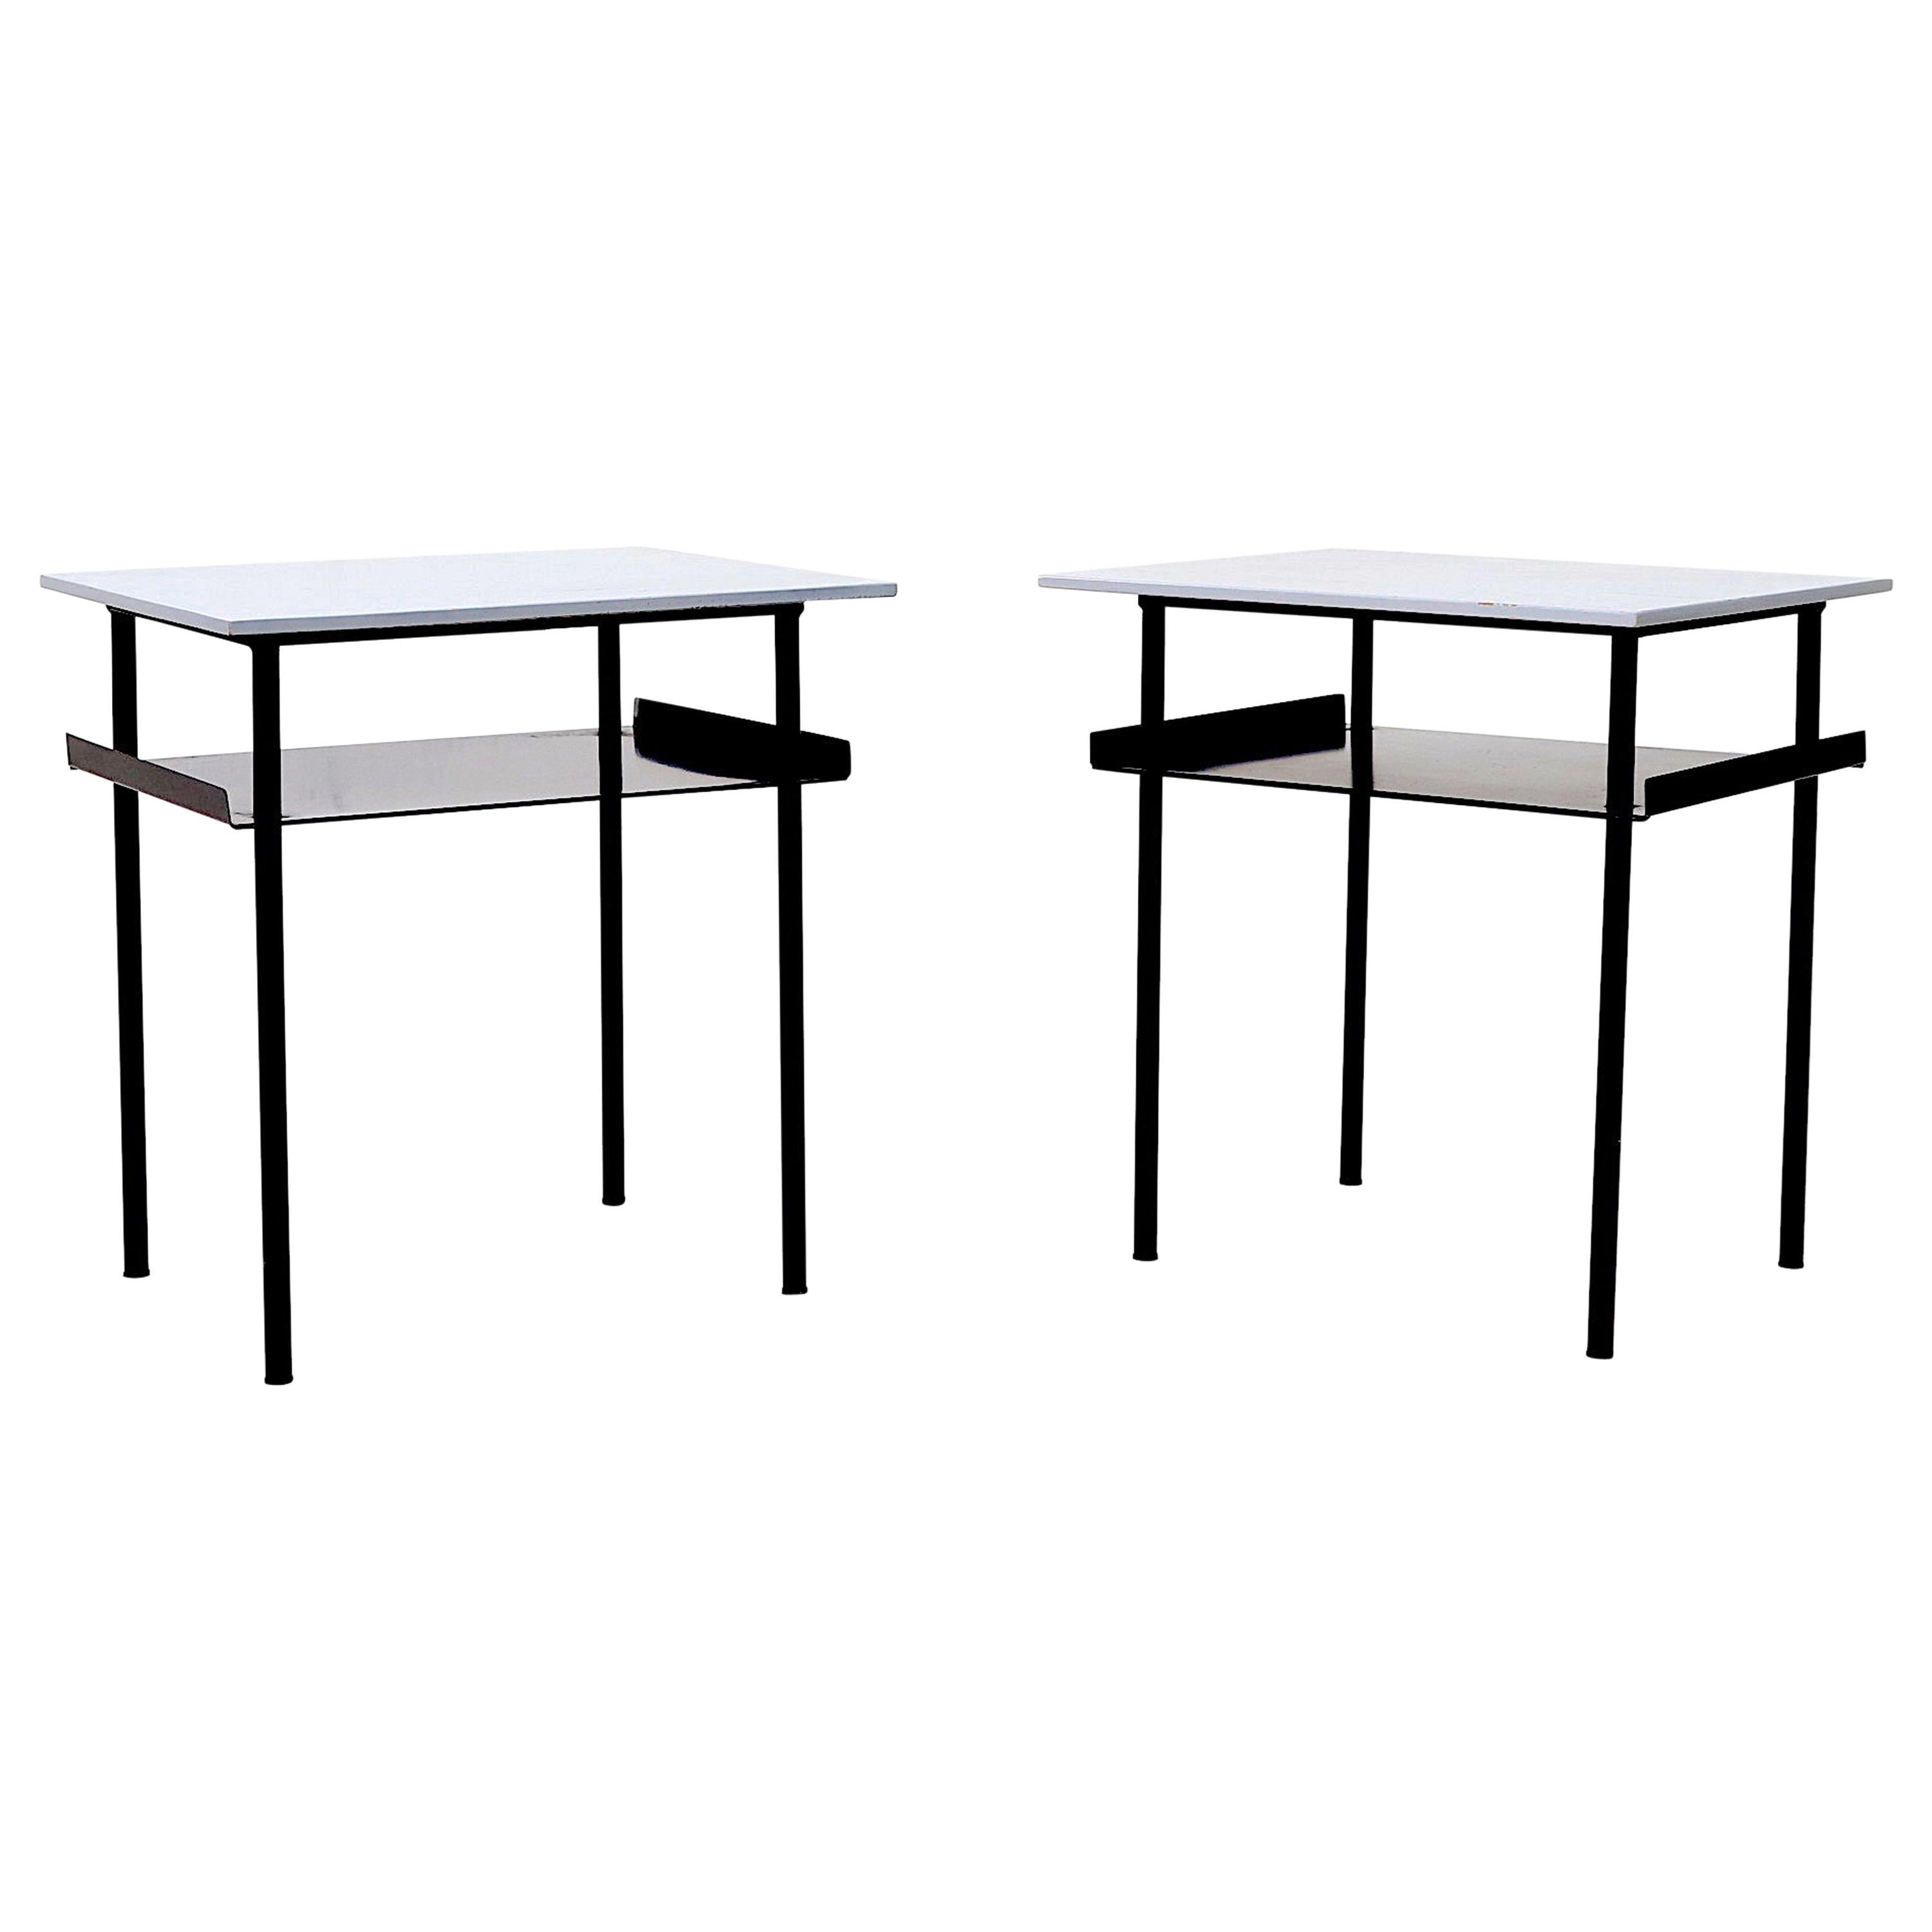 Pair of Wim Rietveld Style Industrial Side Tables by Auping